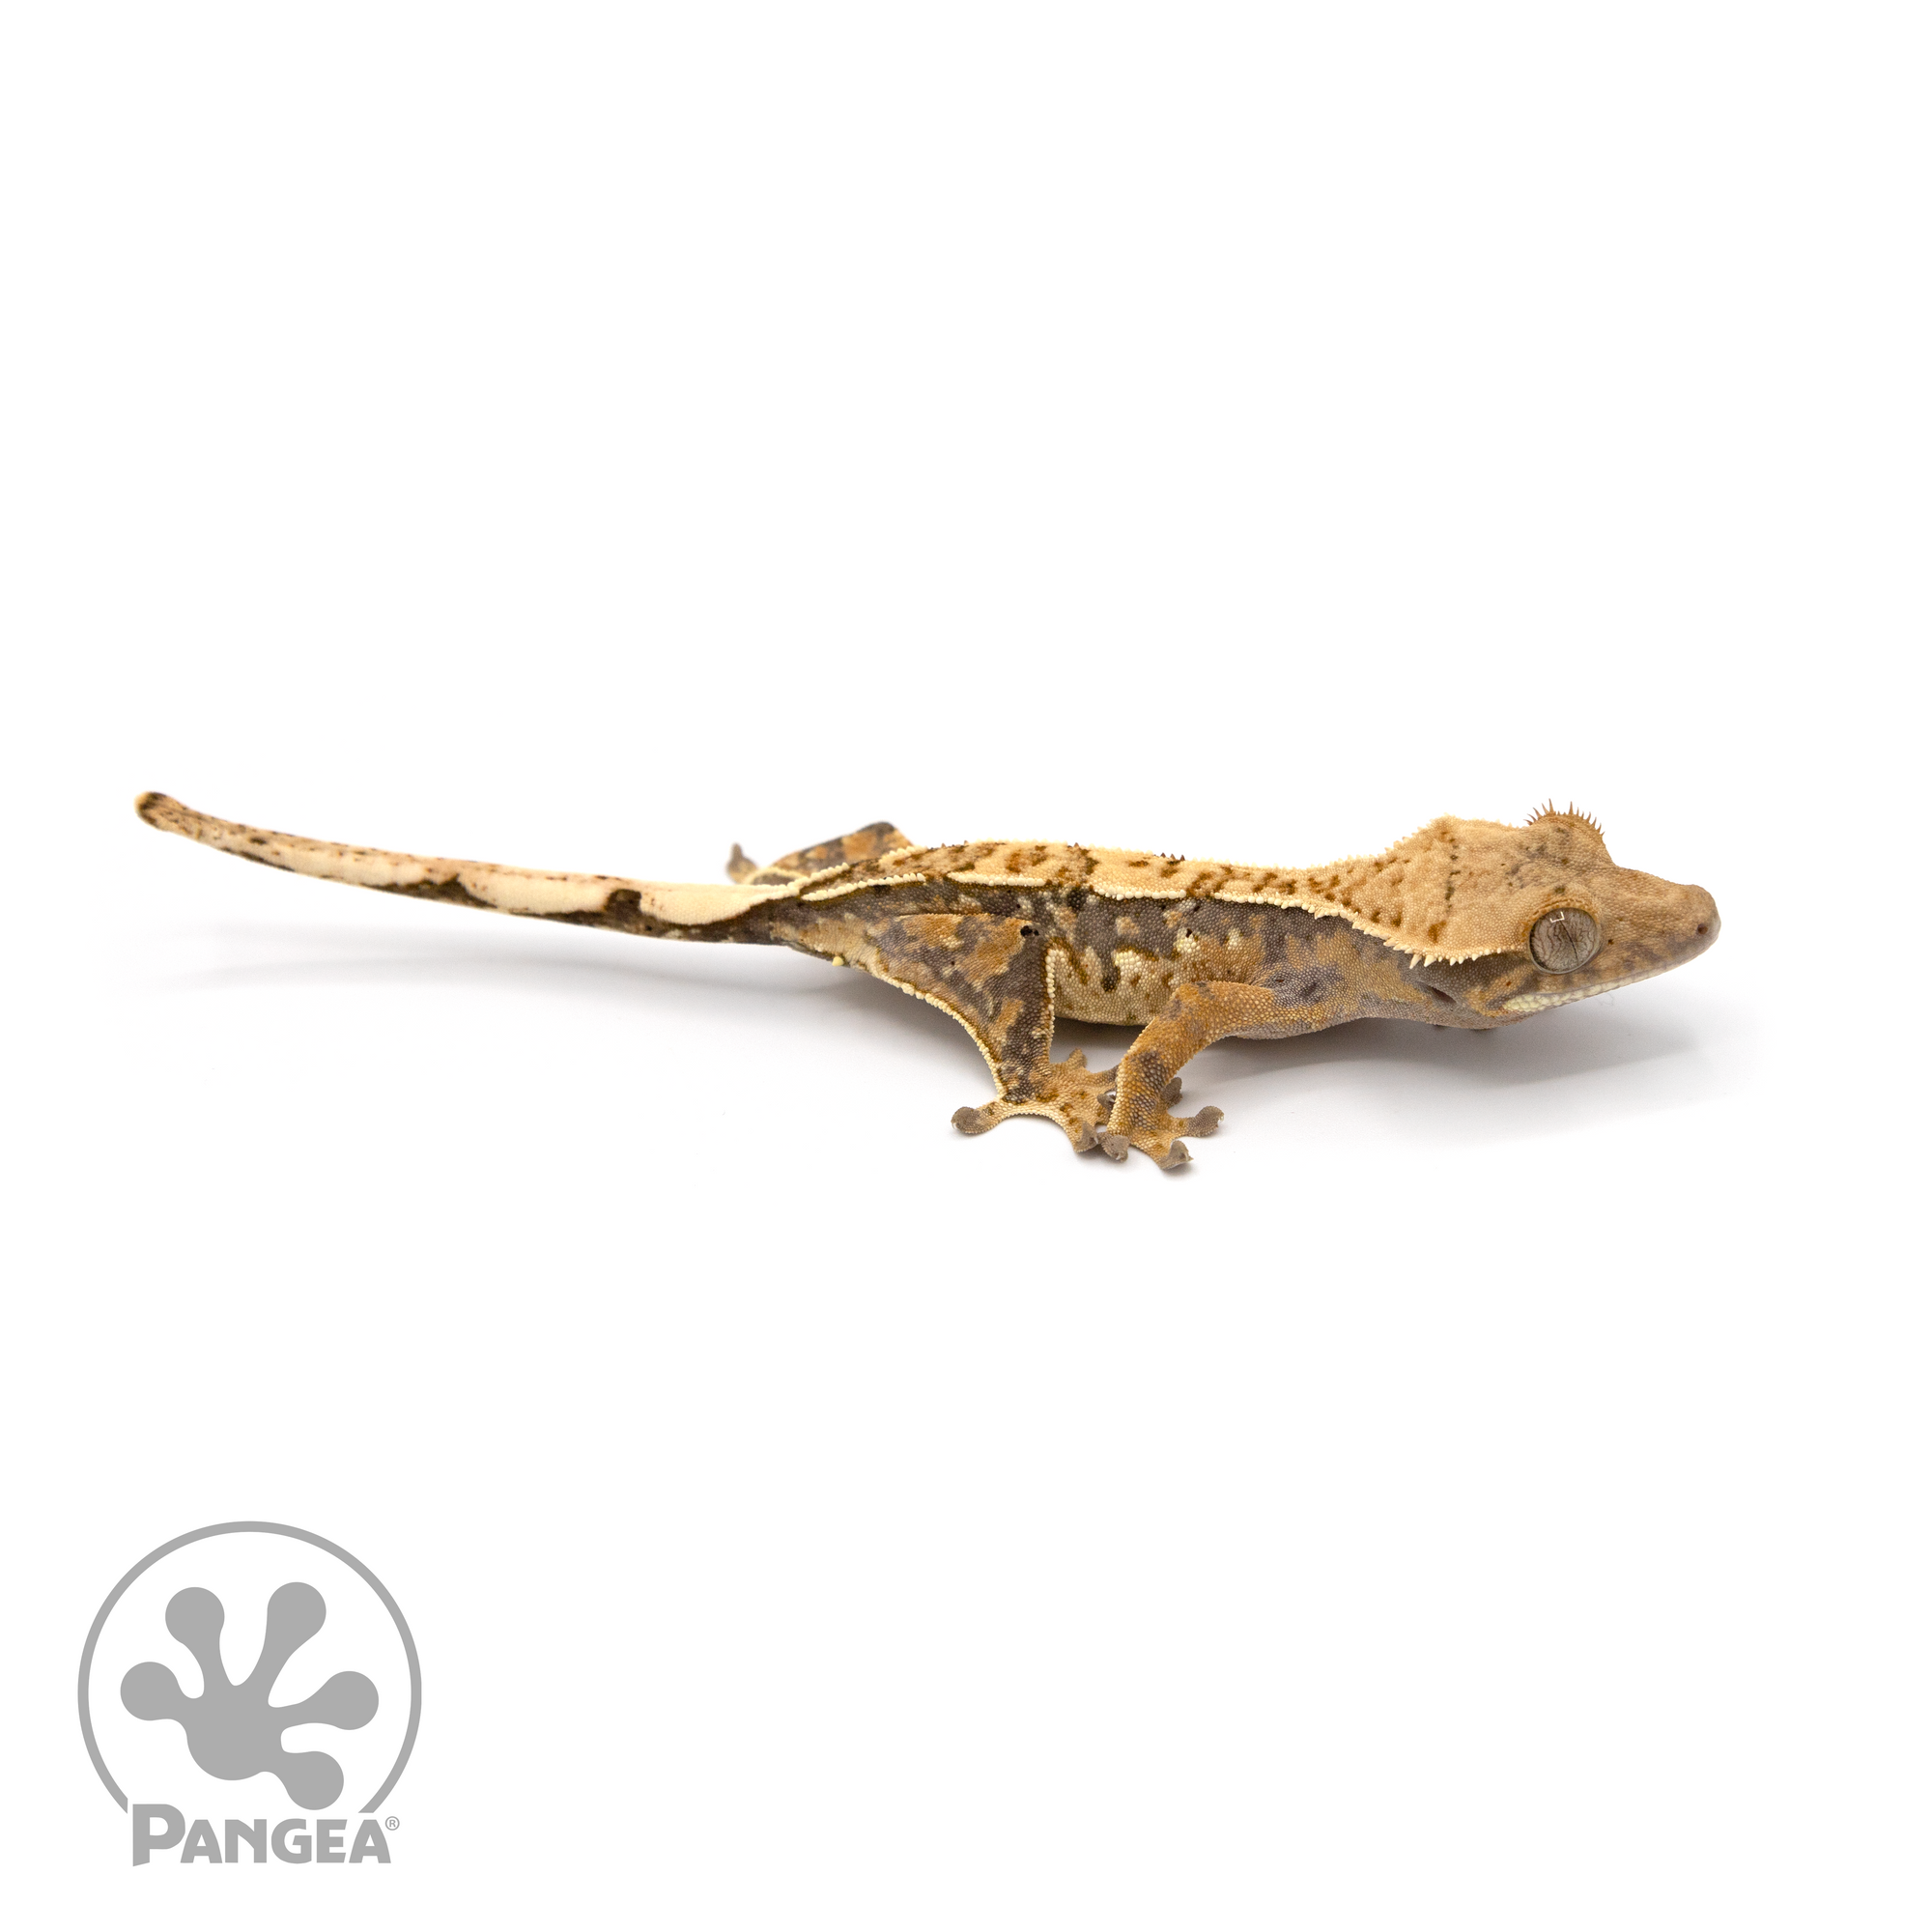 Male Harlequin Crested Gecko Cr-1123 looking right 